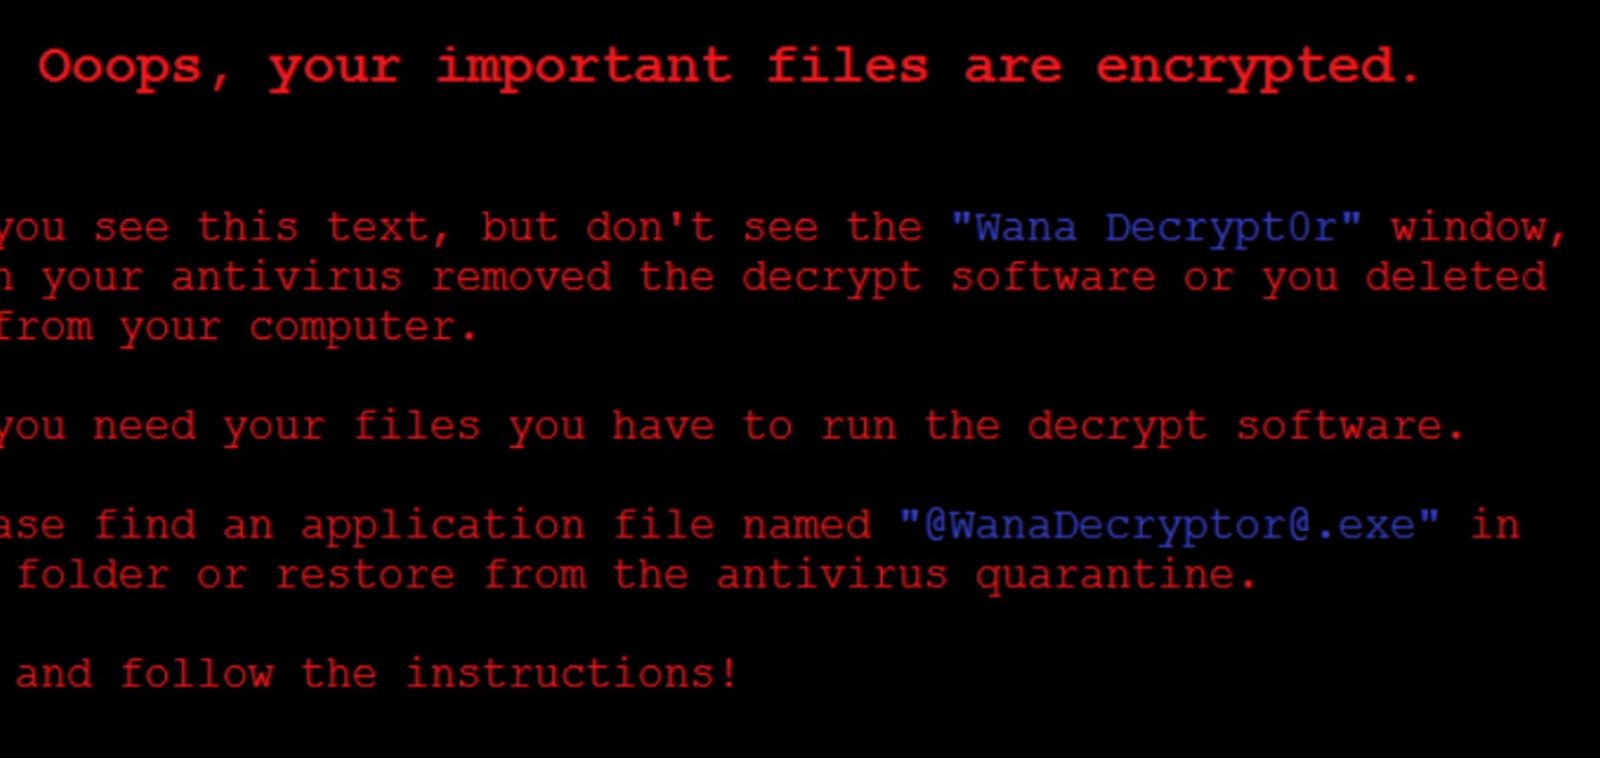 "Ooops, your important files are encrypted." というメッセージが表示されます。